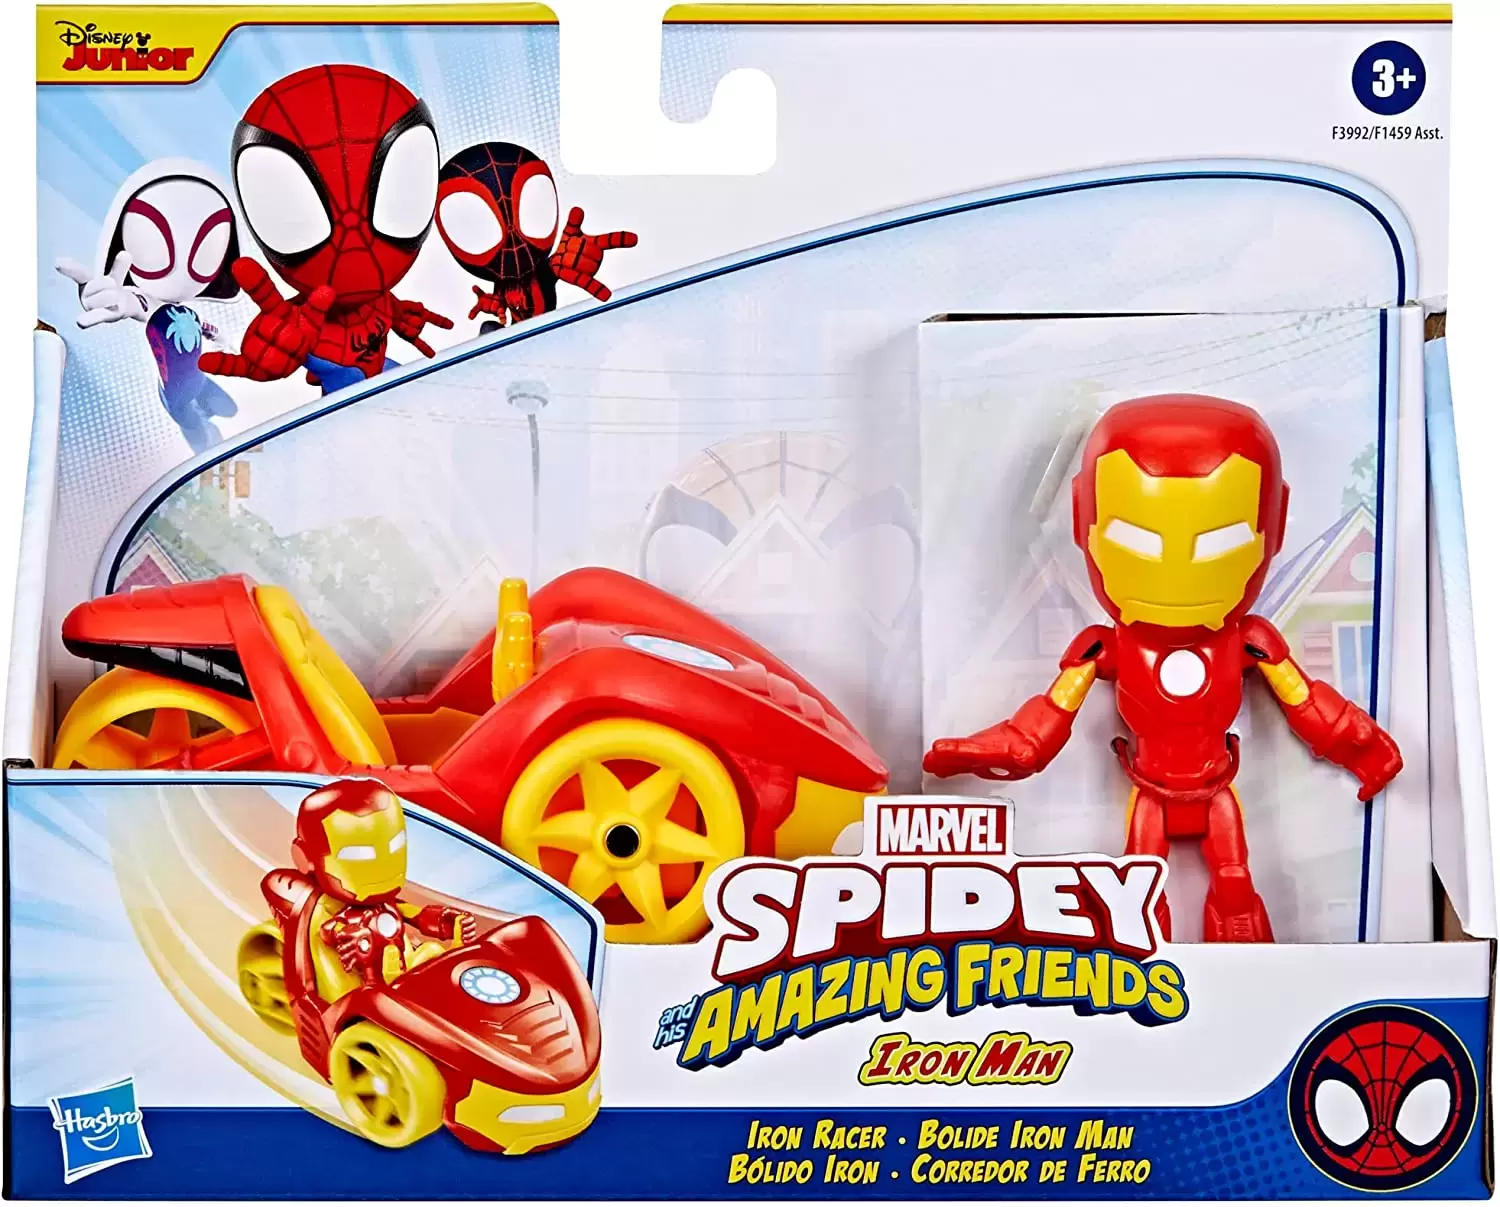 Spidey And His Amazing Friends - Iron Man and Iron Racer